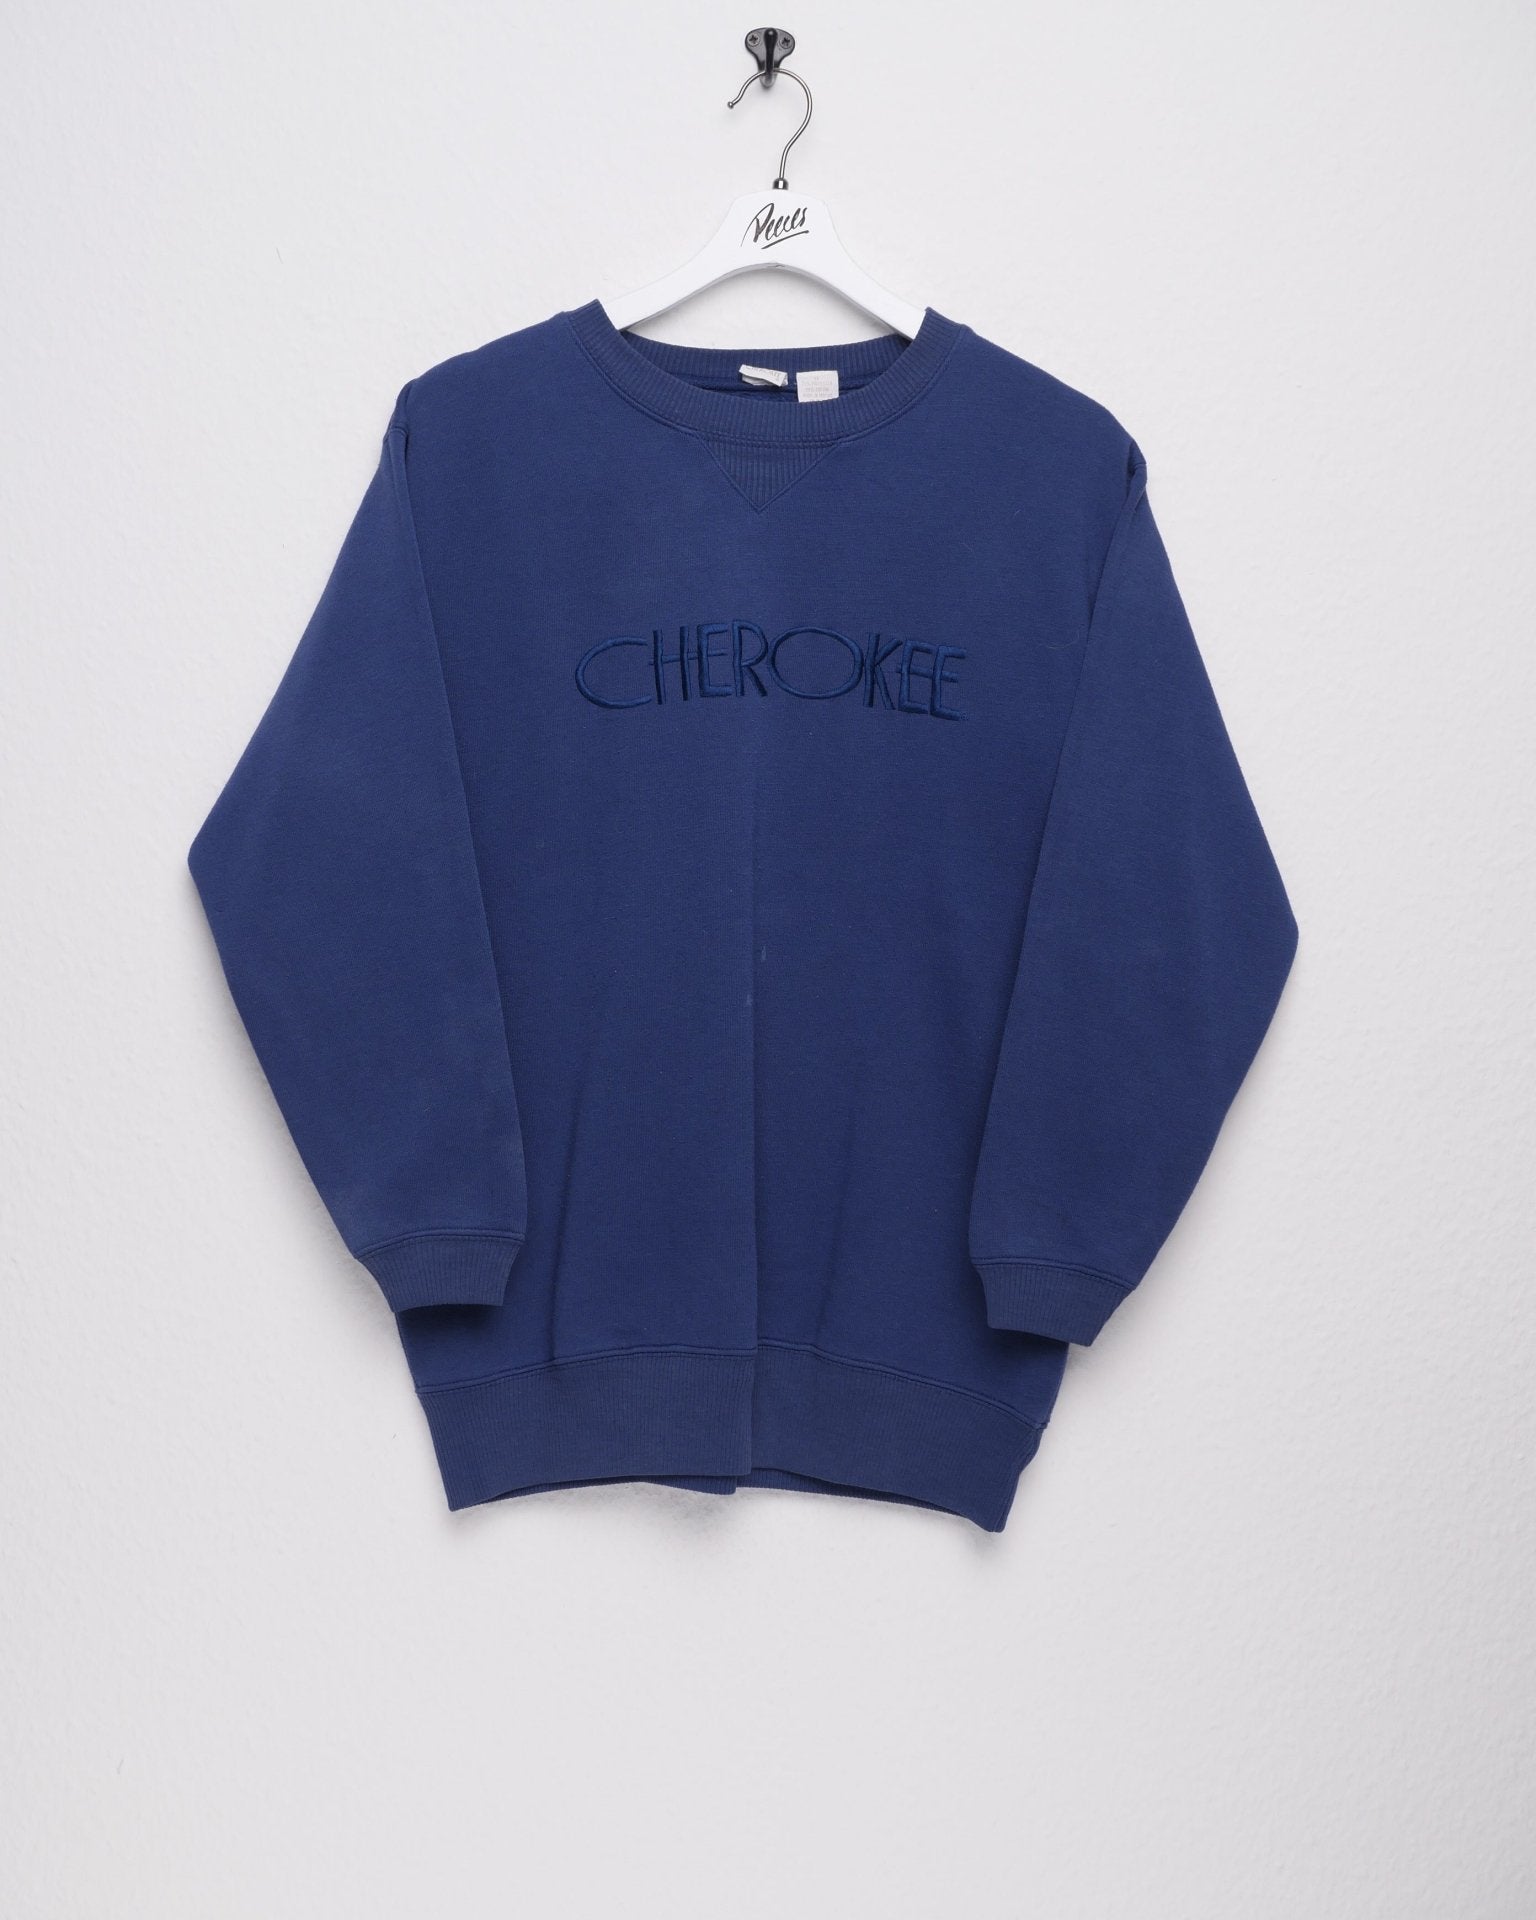 Cherokee embroidered Logo navy Vintage Sweater - Peeces